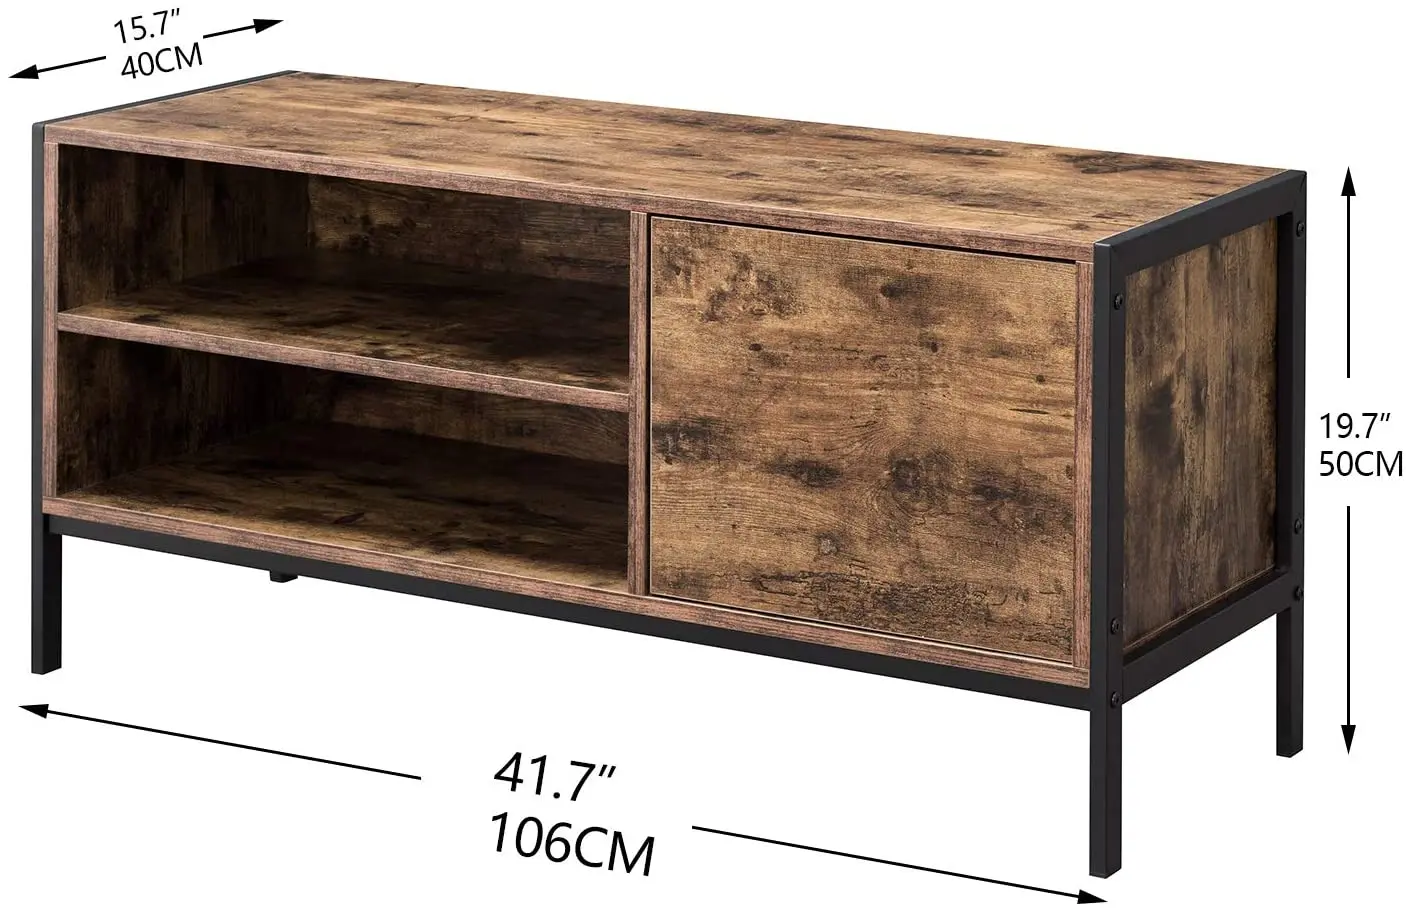 Living Room Furniture Tv Cabinet Stand Wood Industrial Modern Stand Tv Industrial Tv Stand Buy Tv Cabinet Modern Tv Stand Wood Tv Stand Product On Alibaba Com